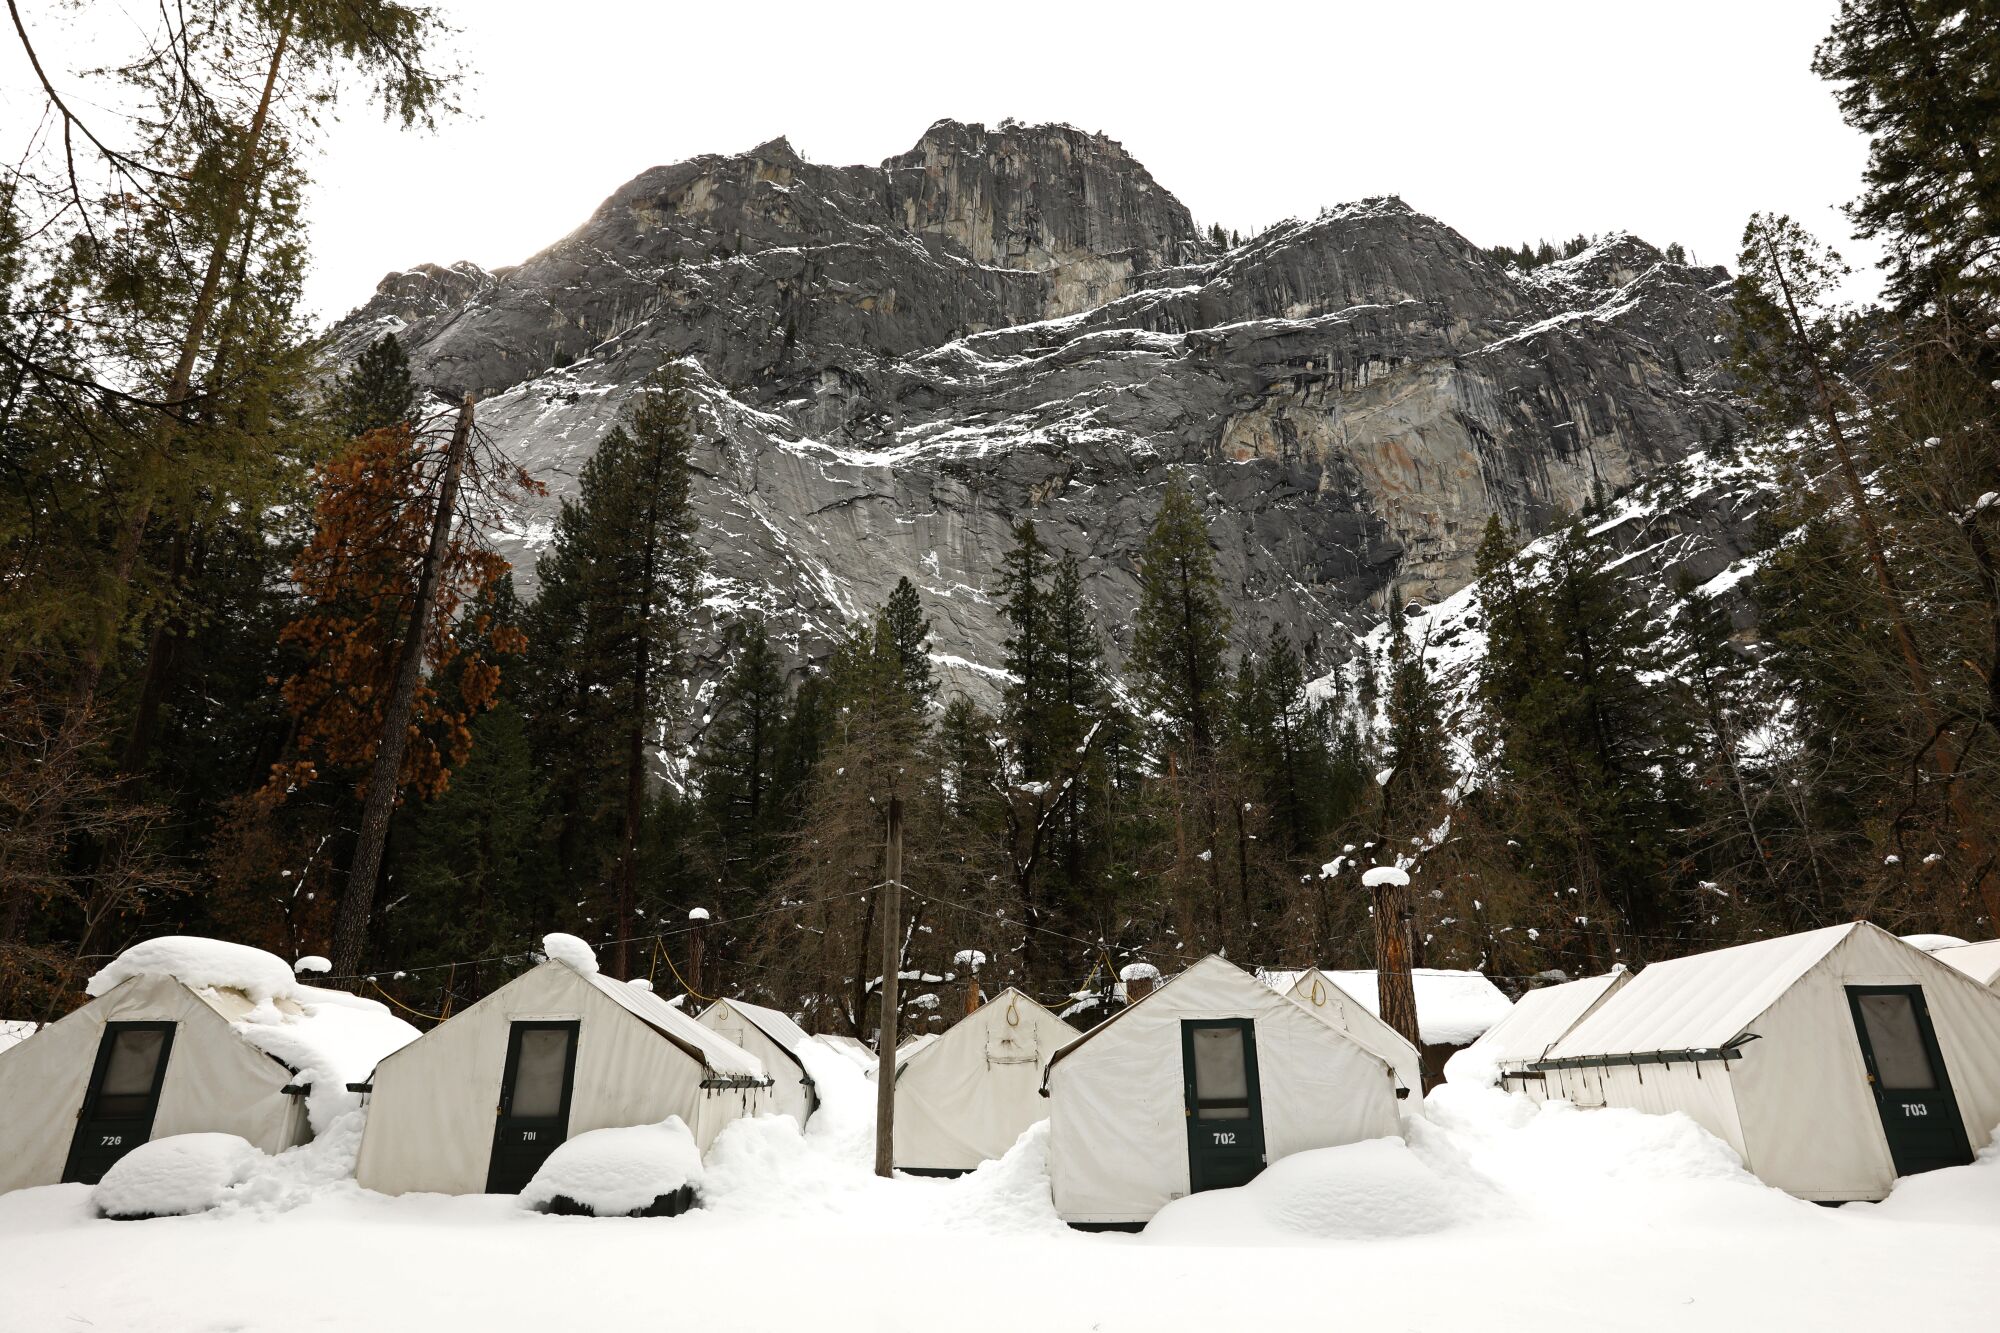 Deep snow blankets the tent cabins at Curry Village.